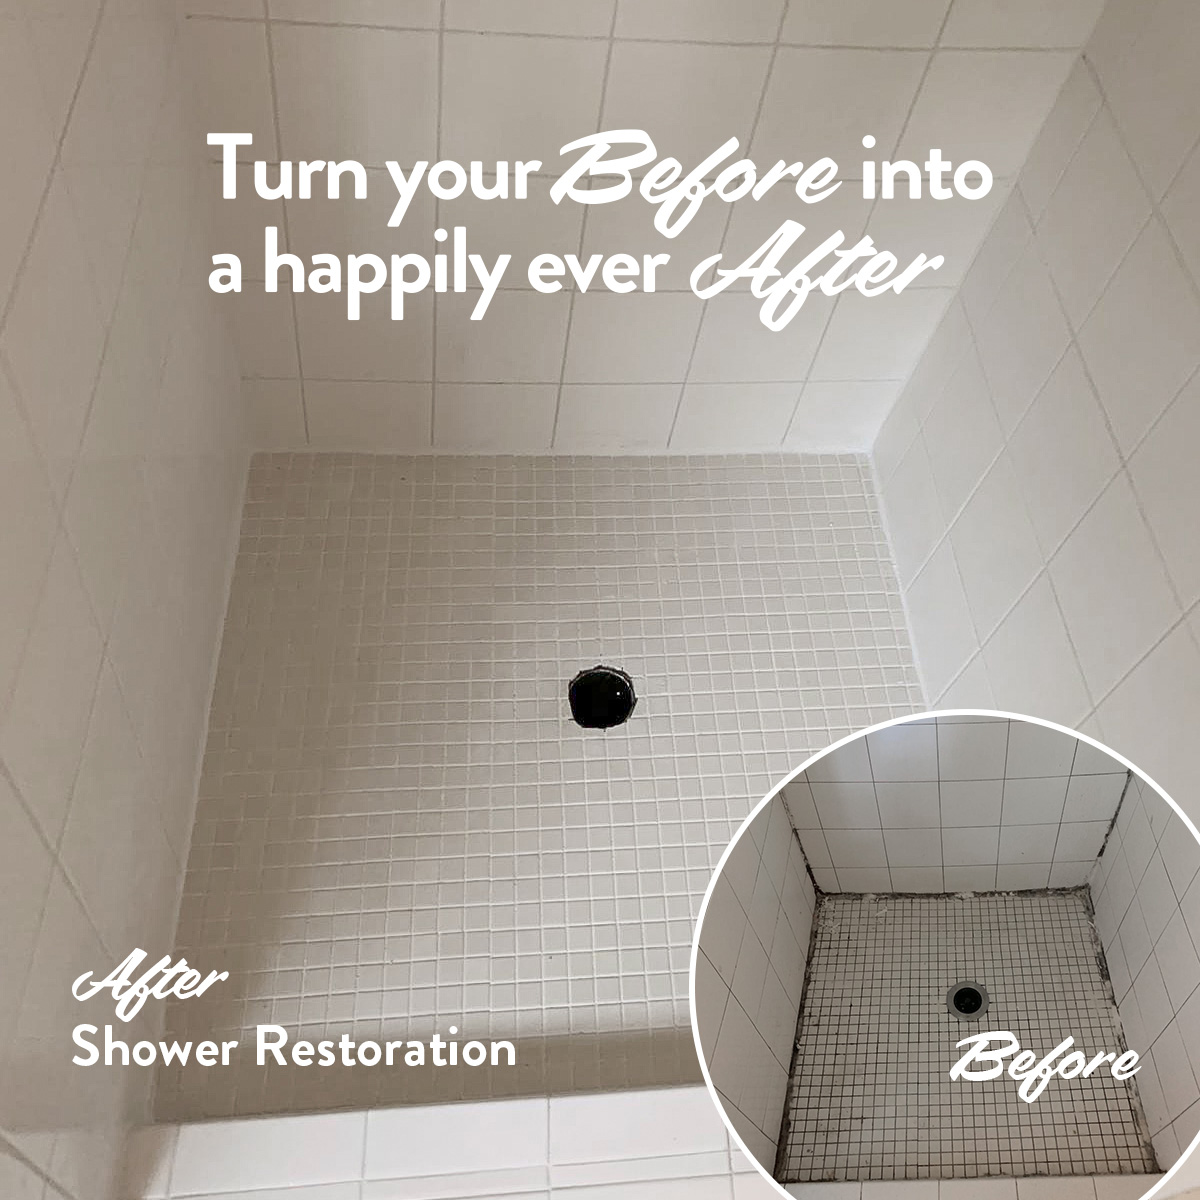 Turn your Before into a happily ever After | After Shower Restoration